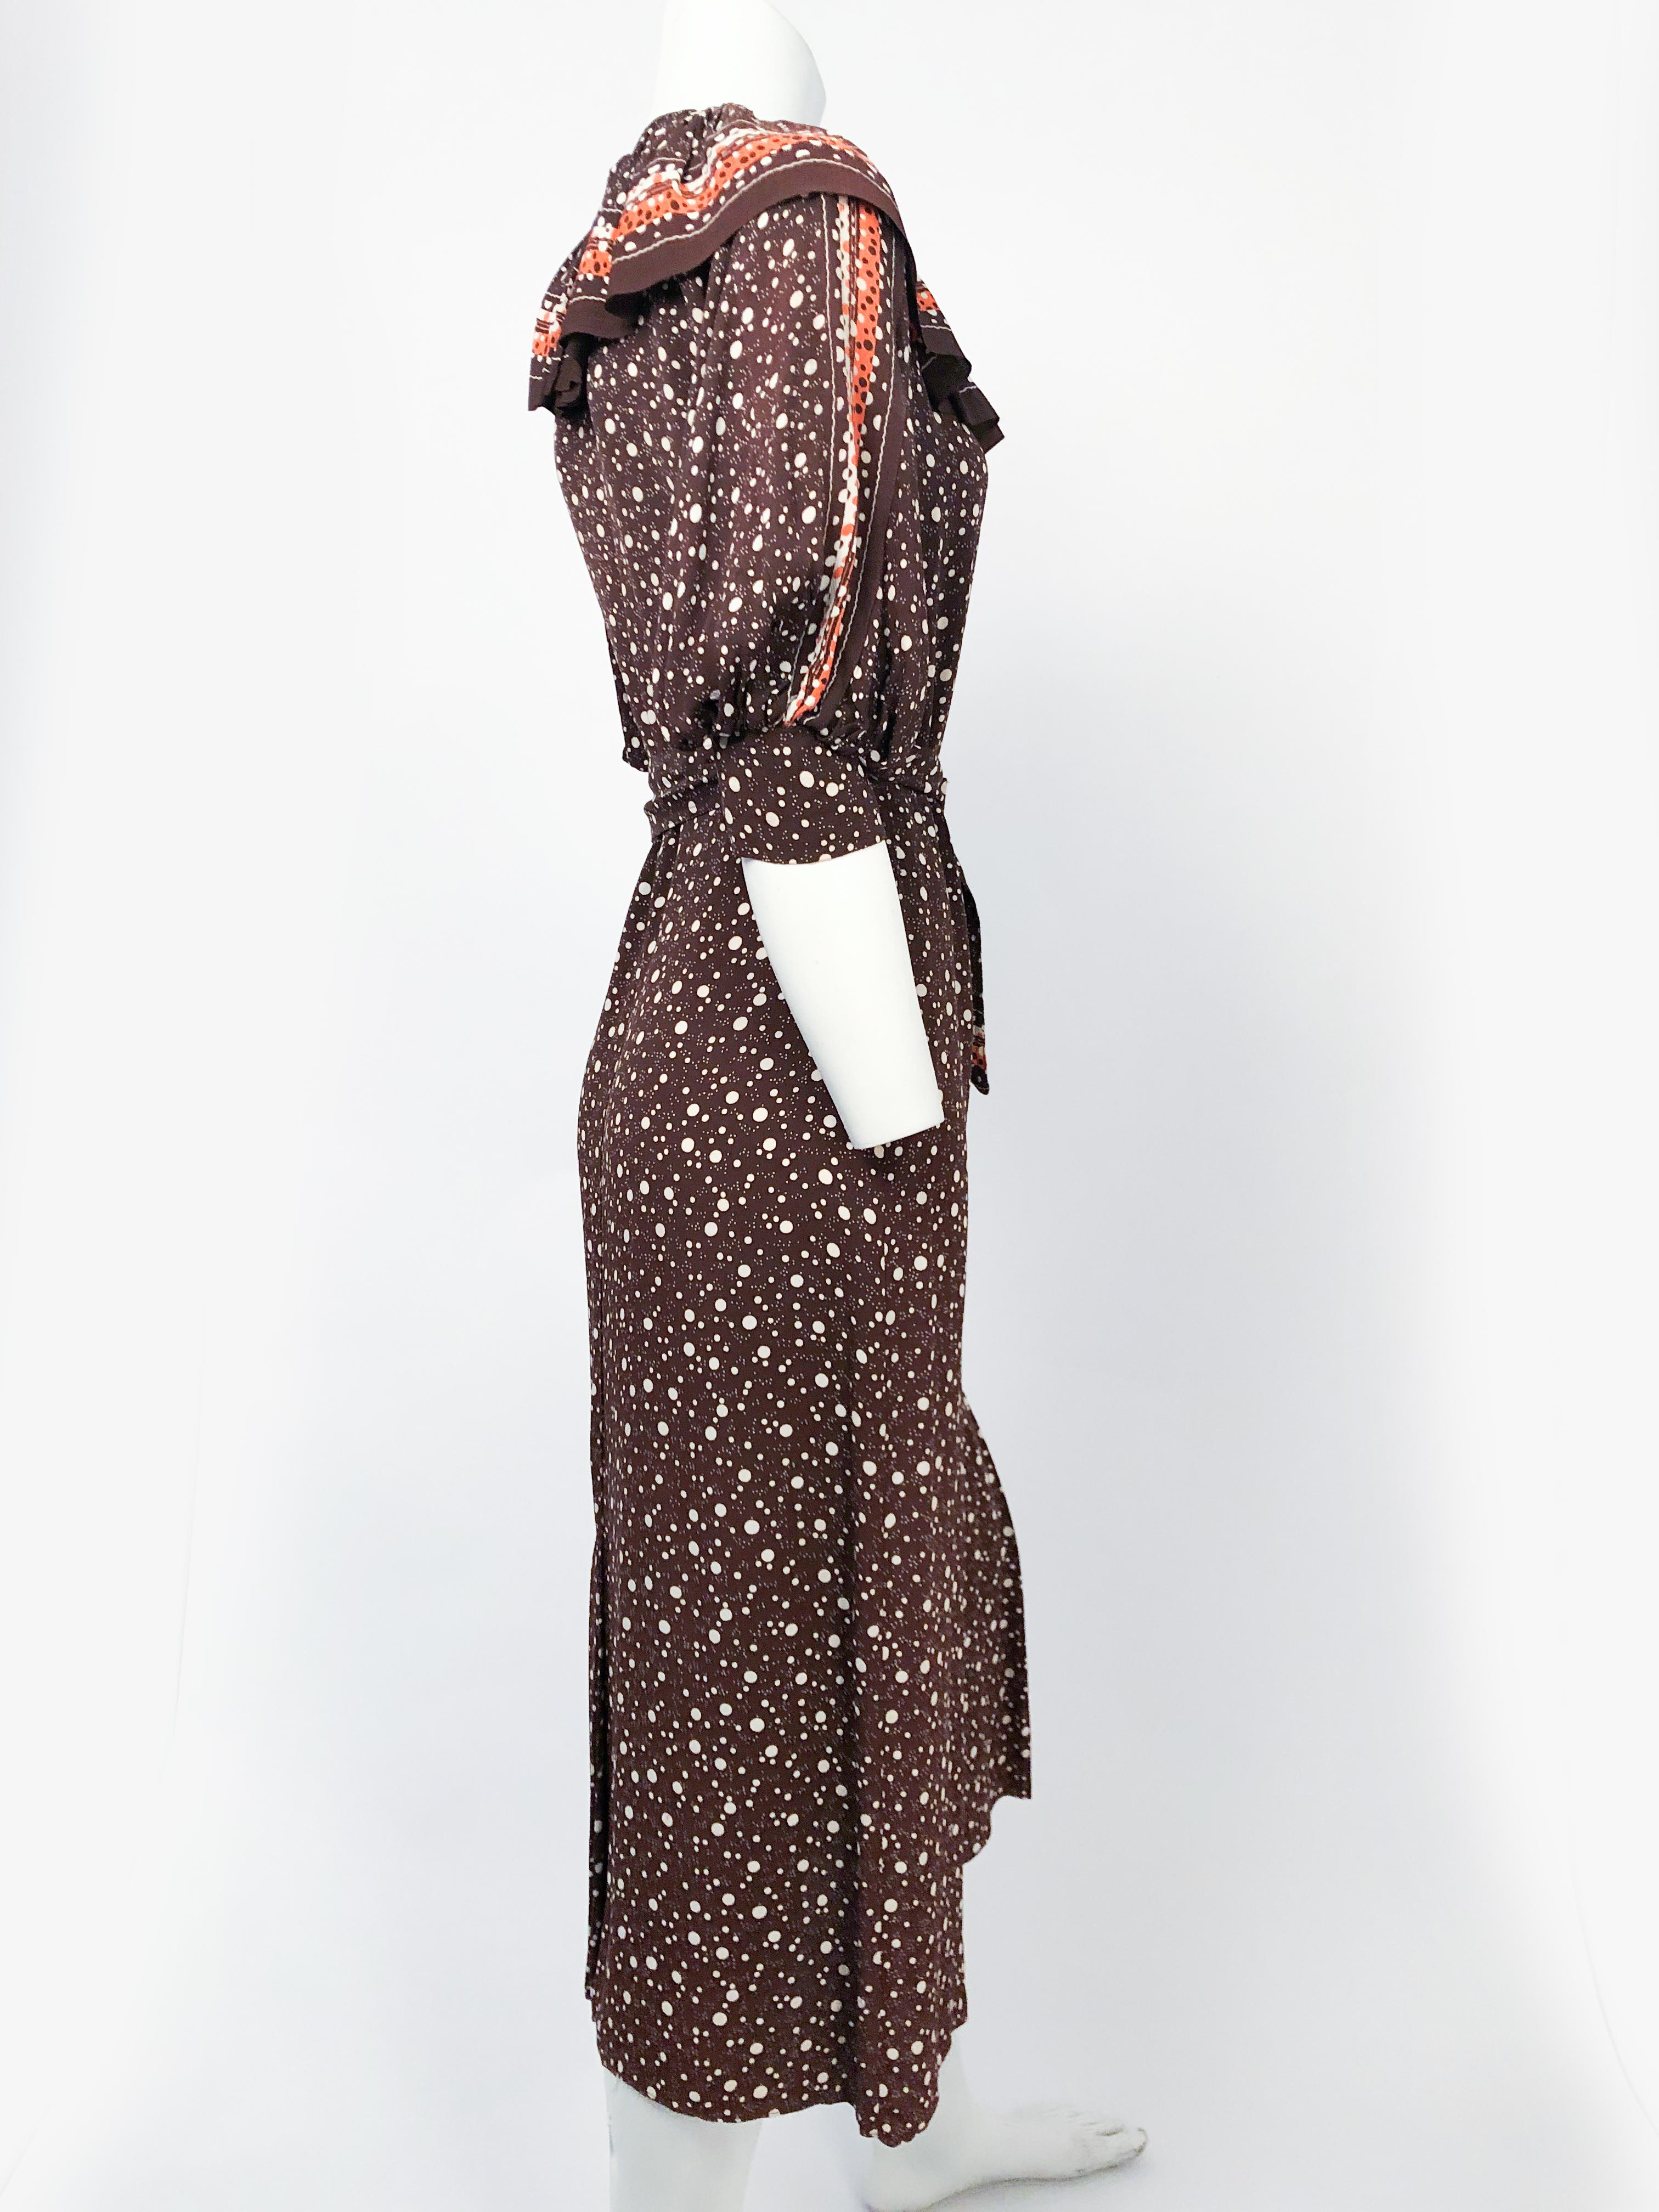 1930s Brown Polka Dot Printed  Crepe Dress with oversized ruffled capelette collar, orange/beige boarder print, cuffed/puffed sleeves, and double-sided sash belt. 